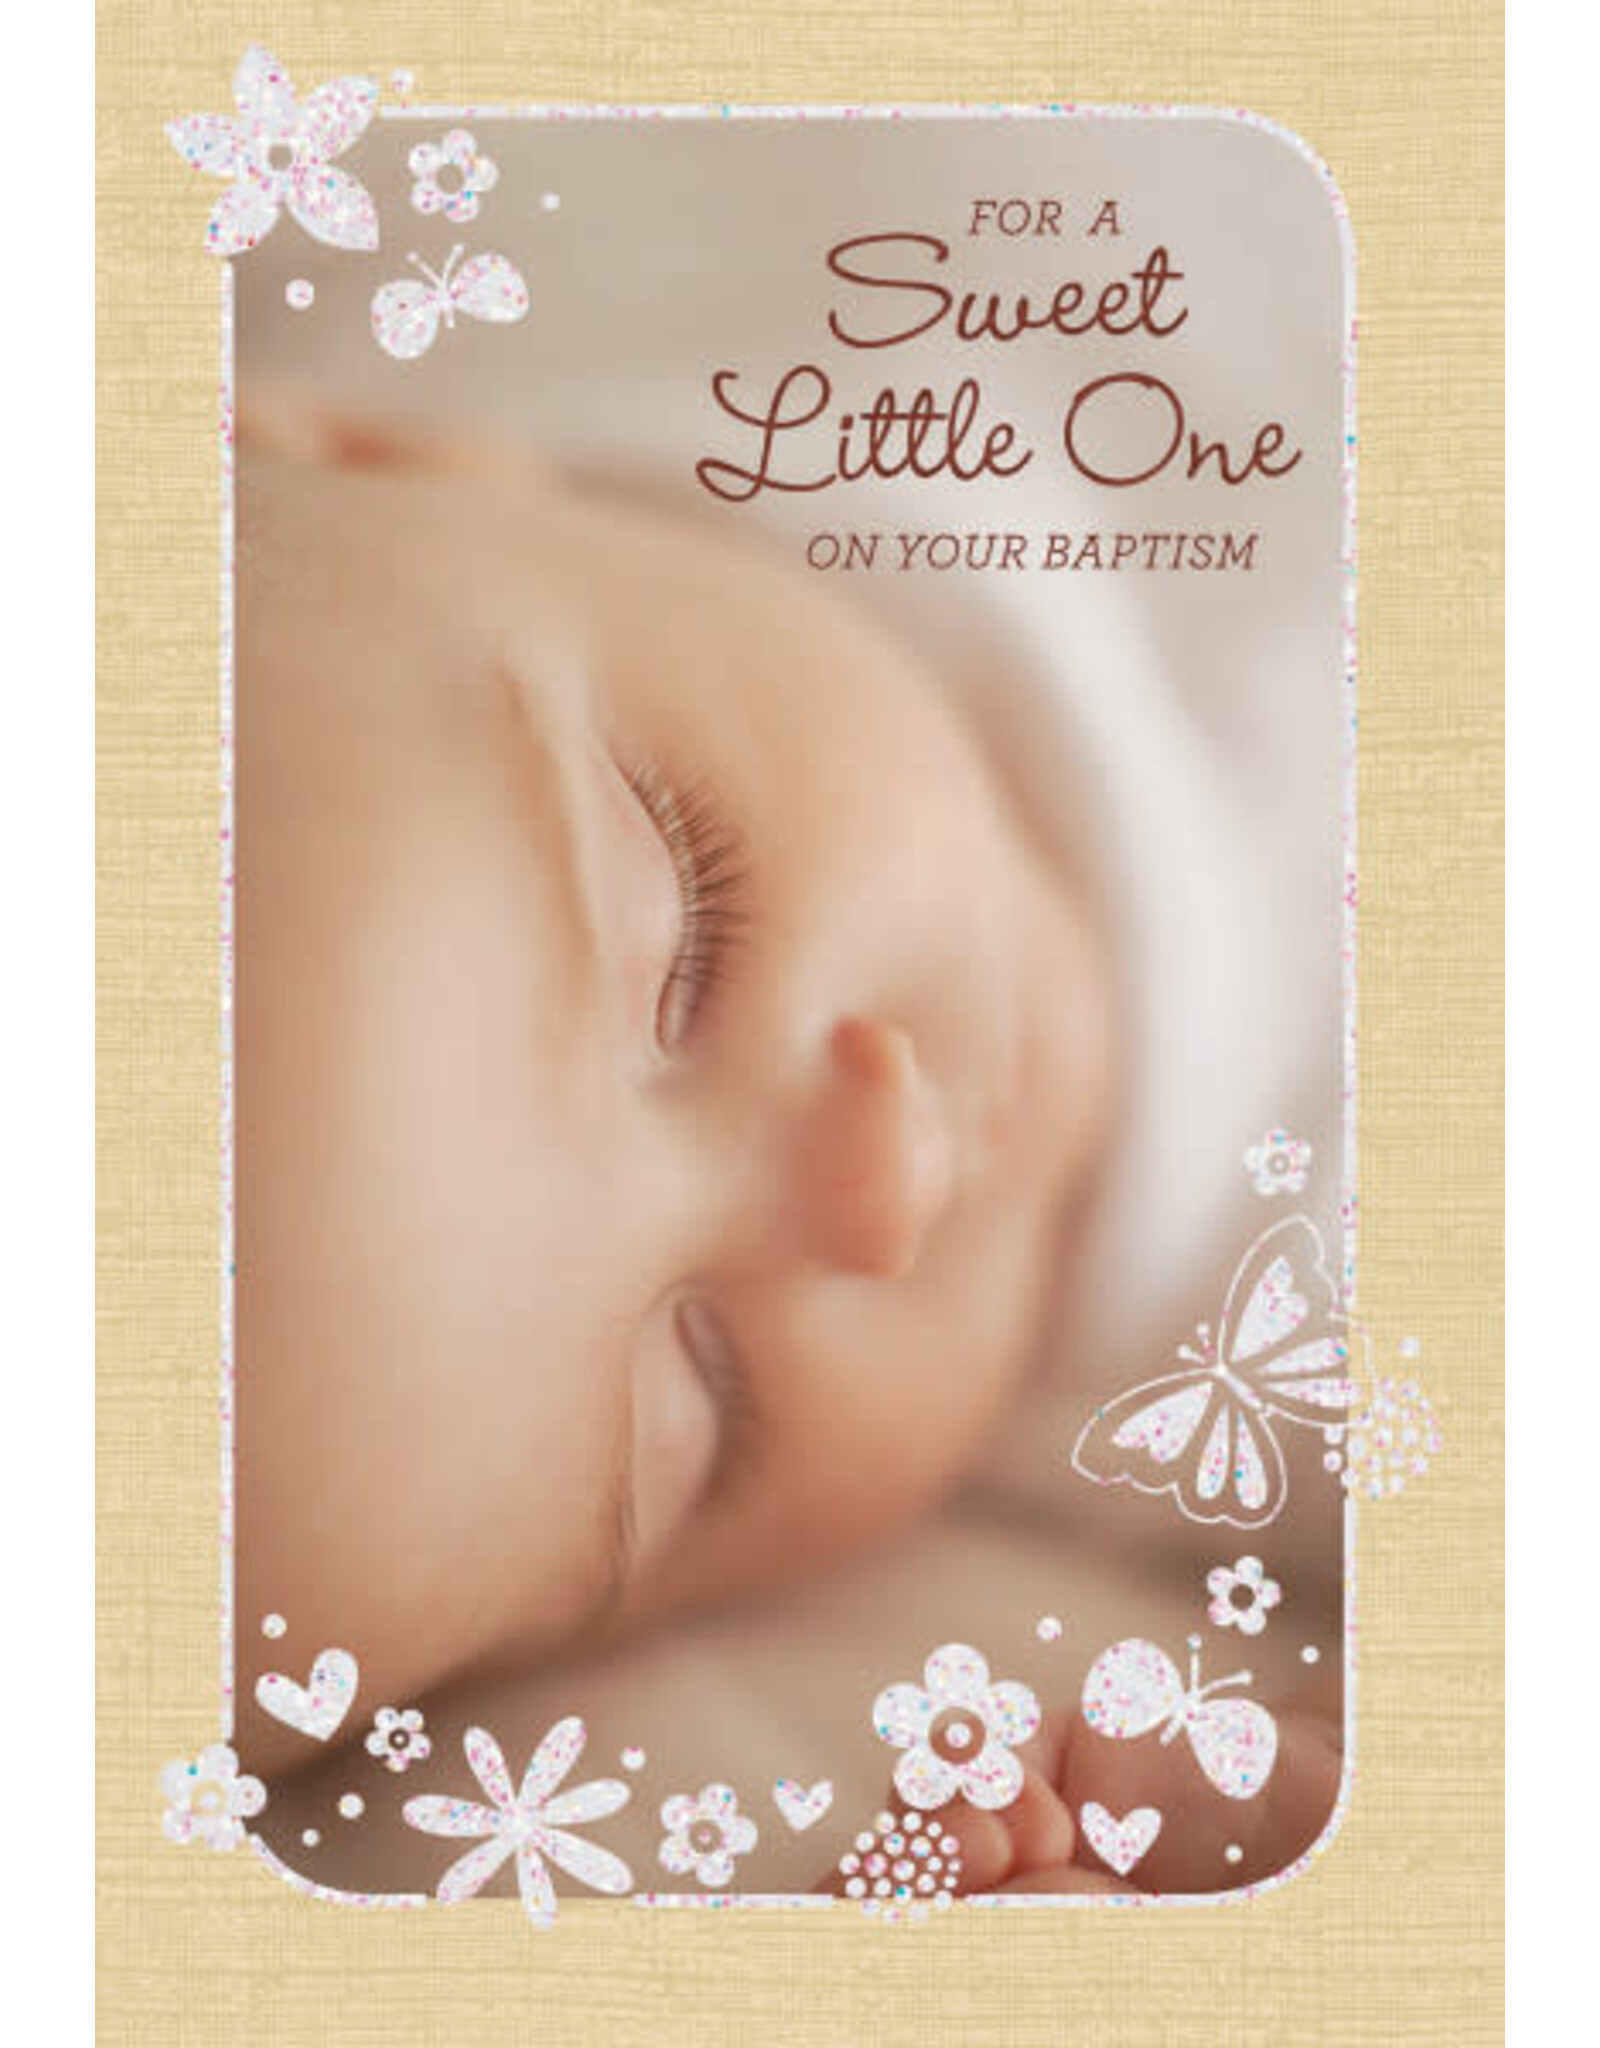 Christian Celebrations Baptism Card - For a Sweet Little One